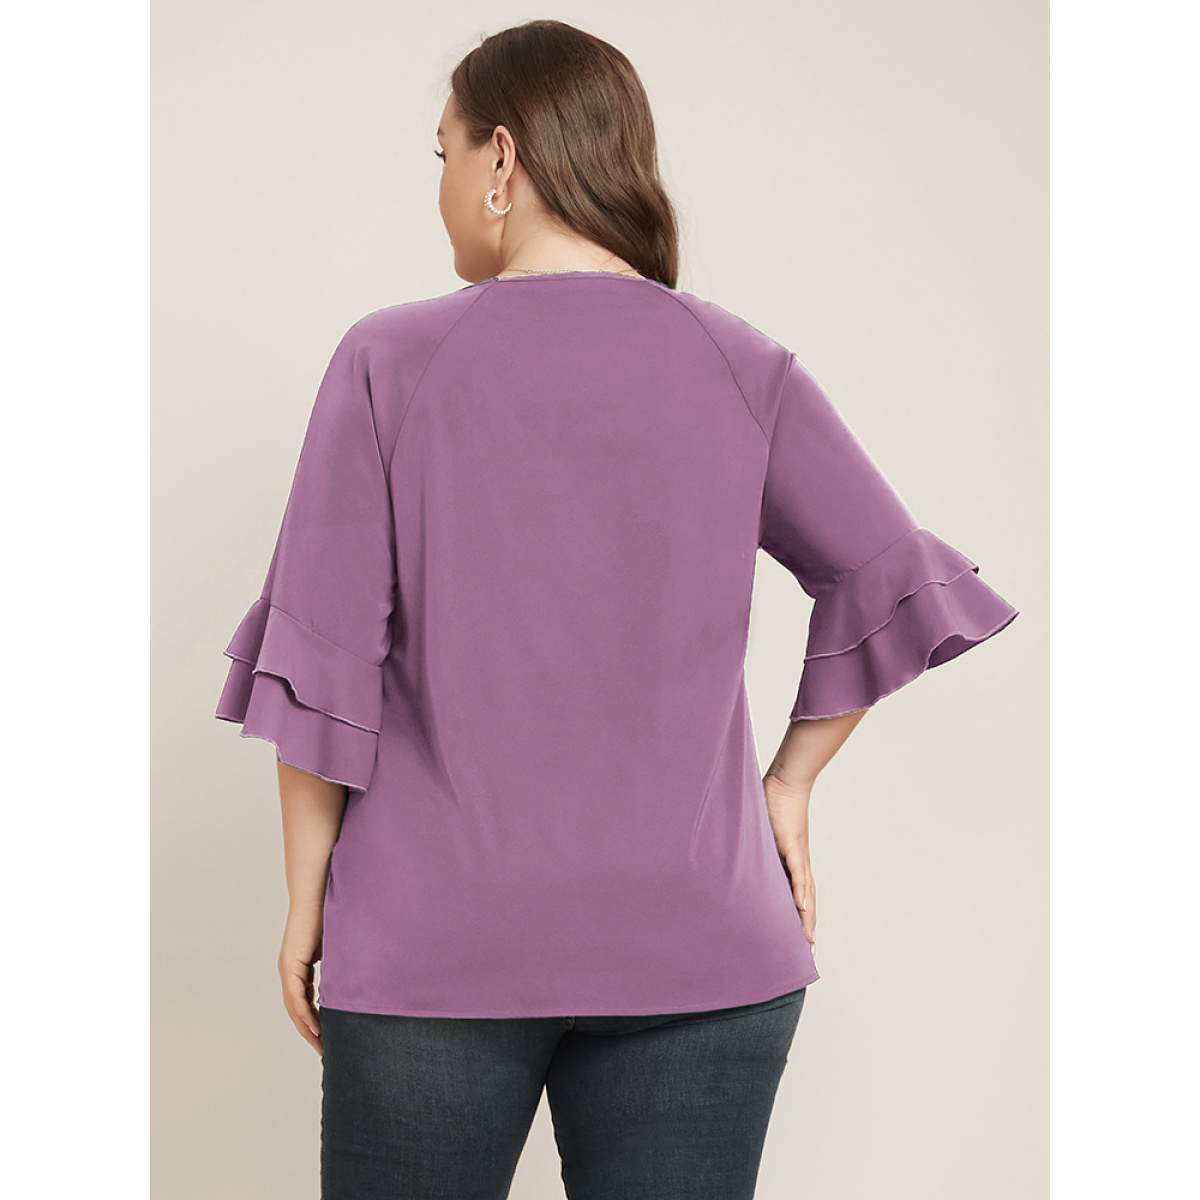 

Plus Size Mauve Plain Ruffle Tiered Round Neck Blouse Women Work From Home Elbow-length sleeve Round Neck Work Blouses BloomChic